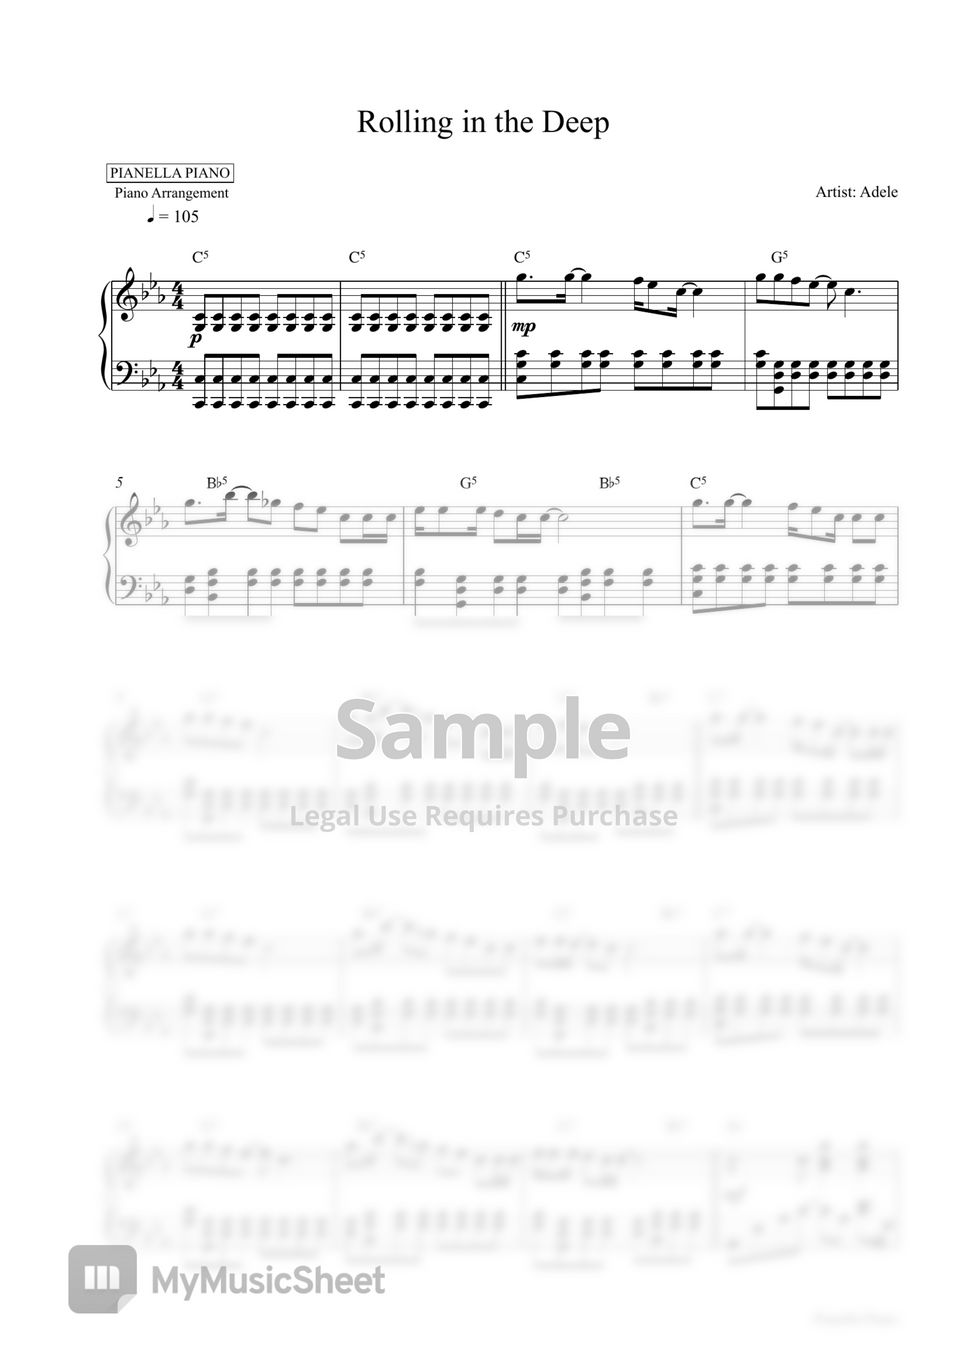 Adele - Rolling in the Deep (Piano Sheet) by Pianella Piano